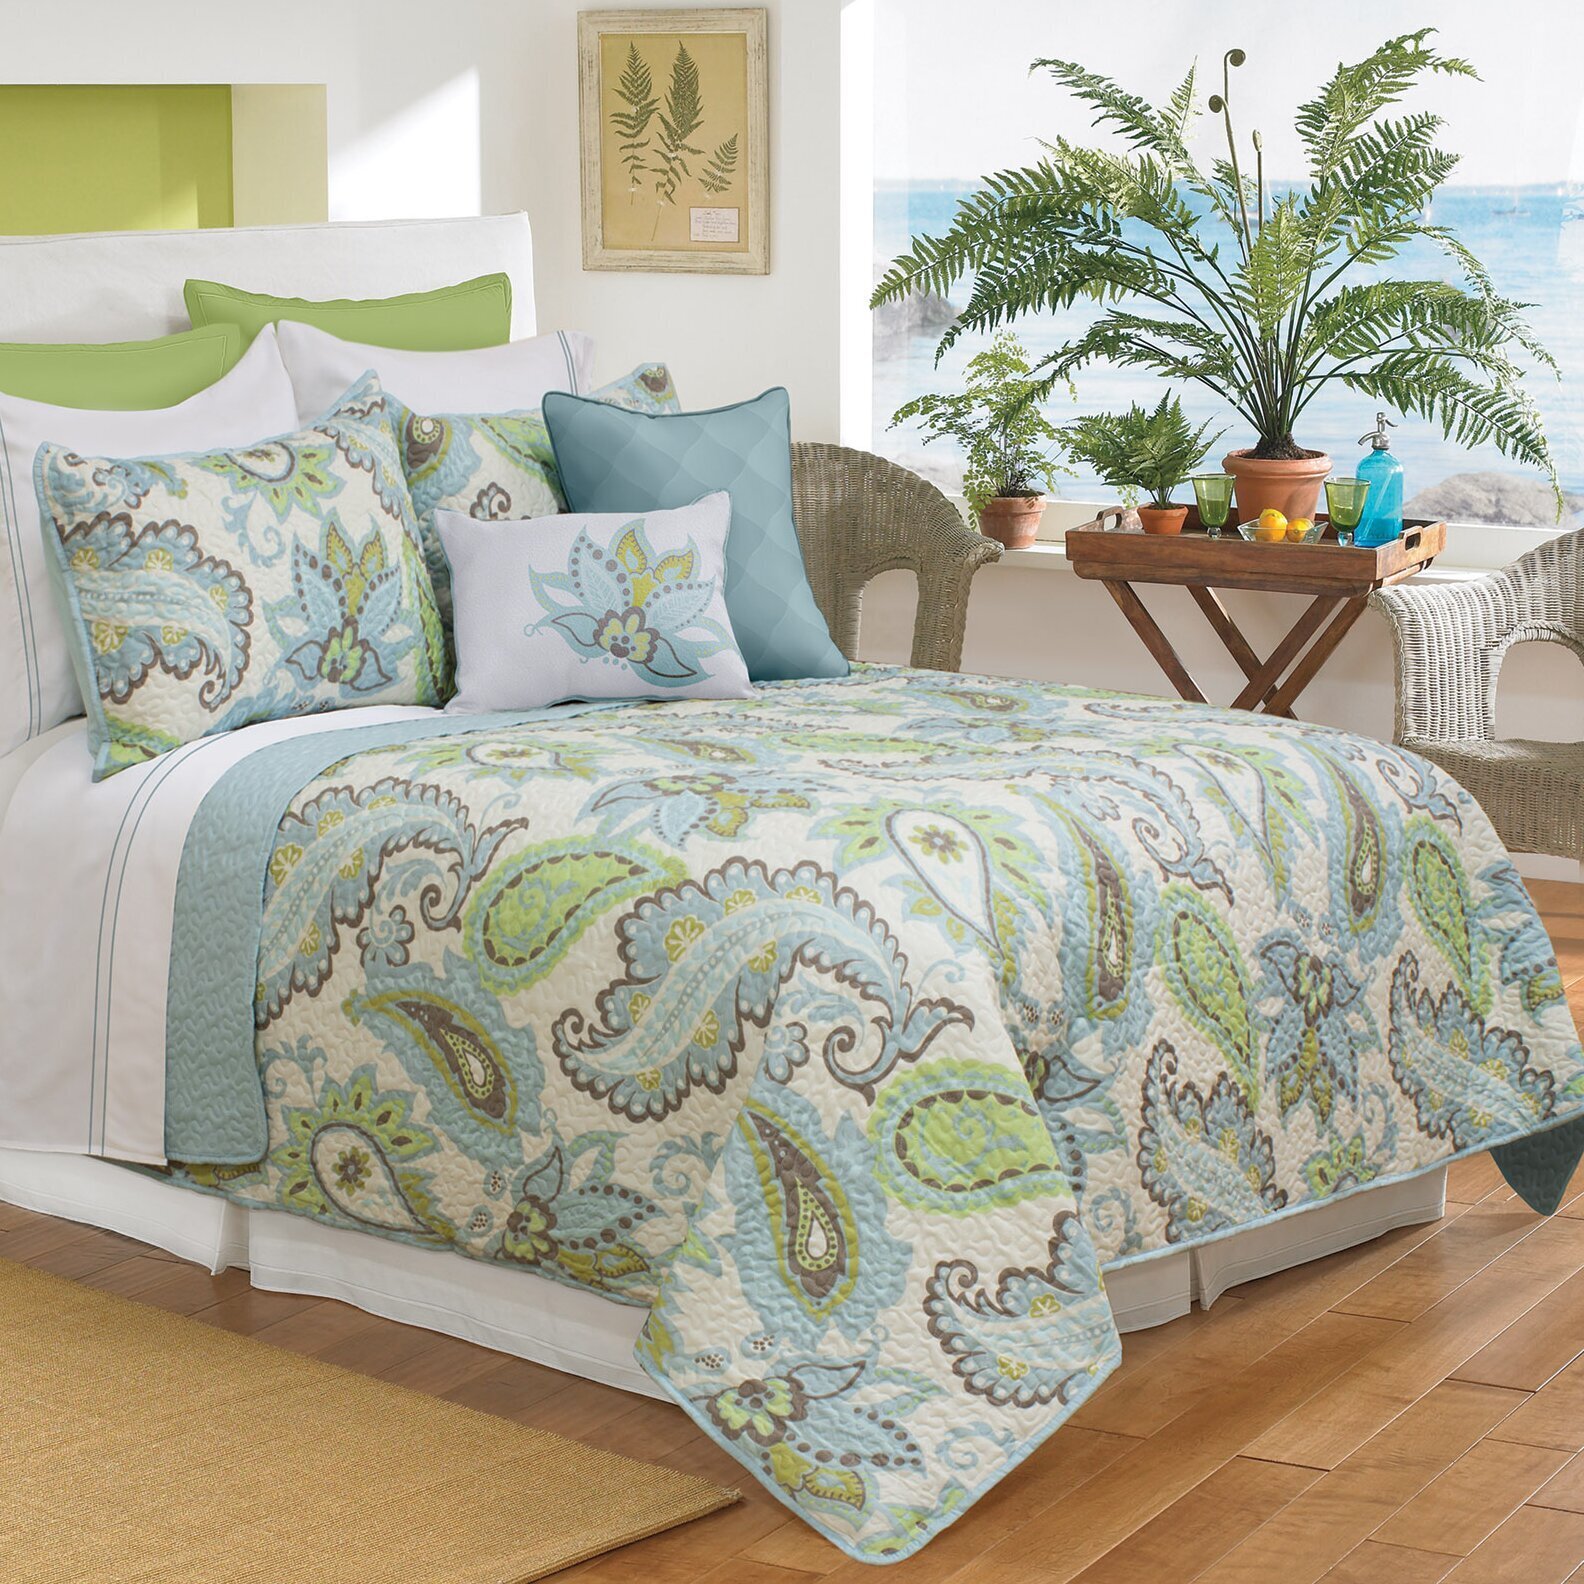 Pastel Blue and Green Bedding